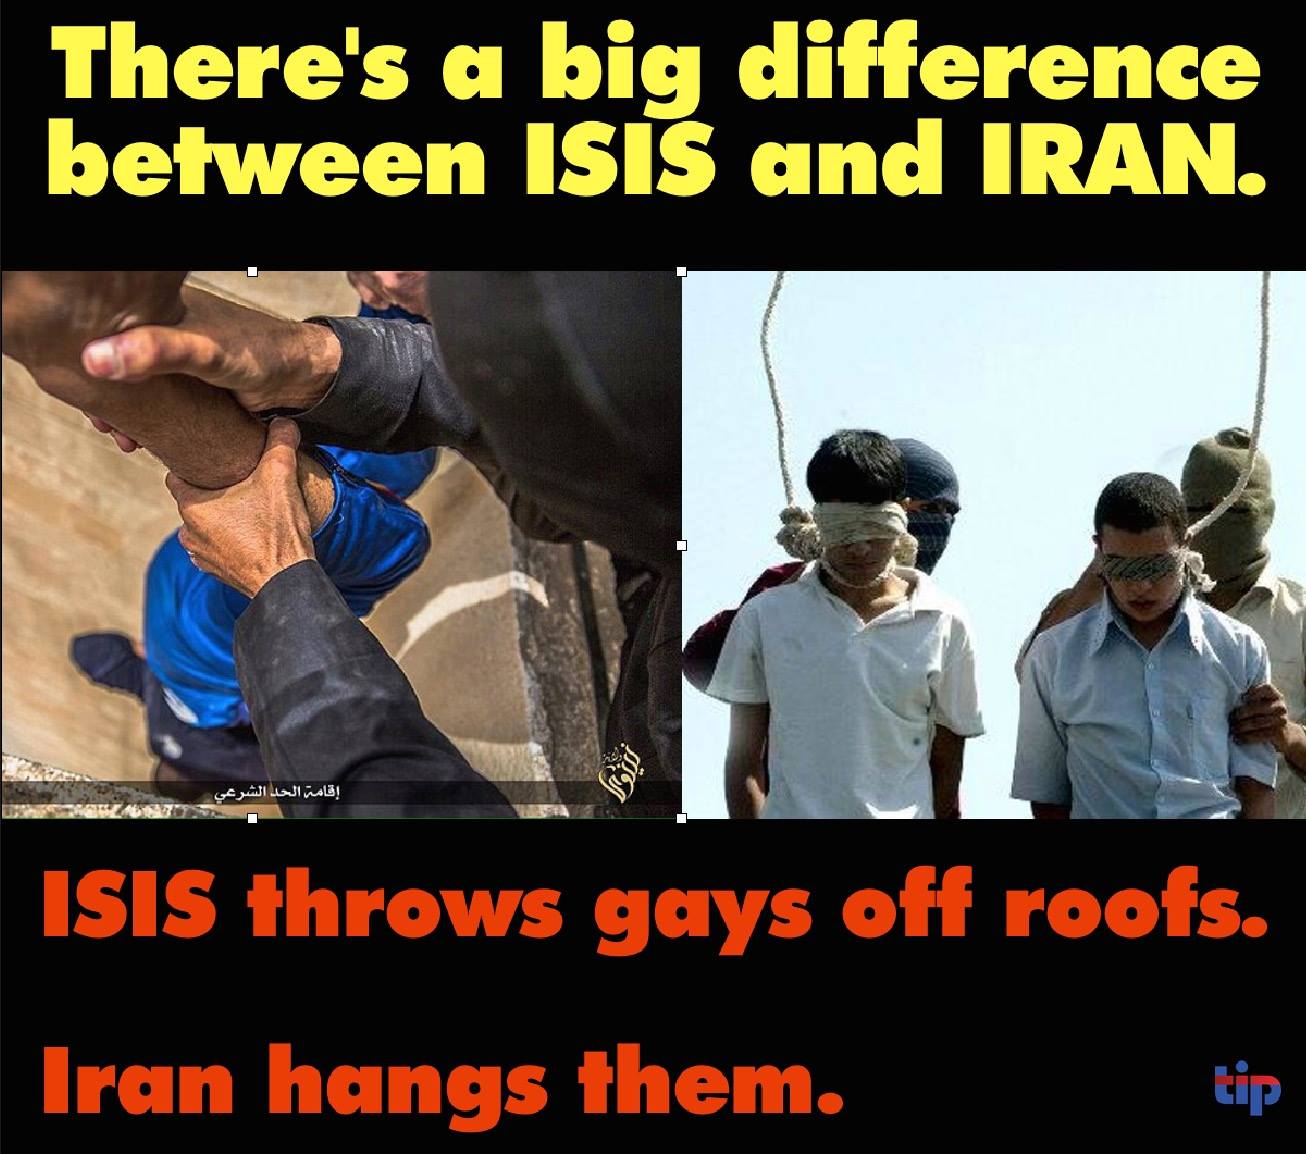 theres-a-big-difference-between-isis-and-iran